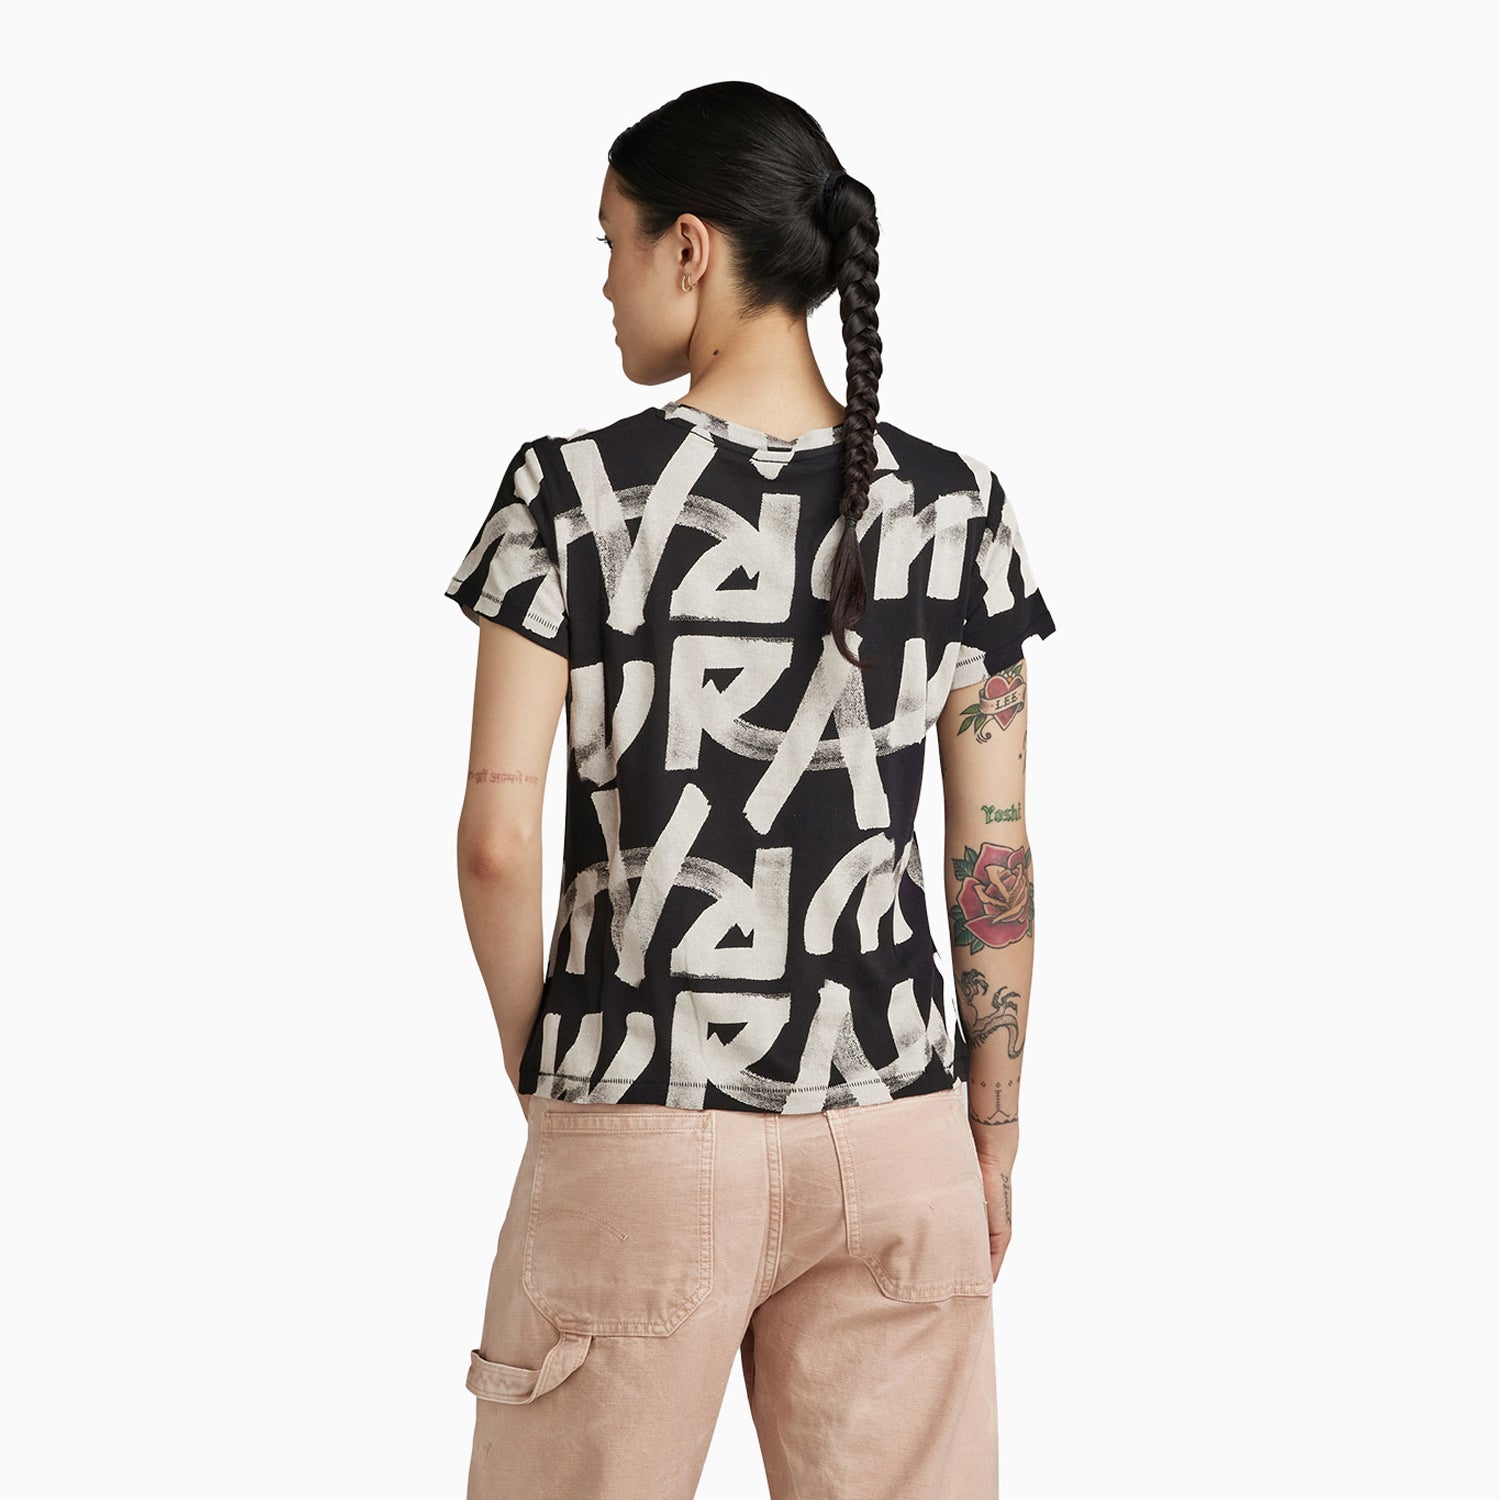 g-star-raw-womens-calligraphy-all-over-t-shirt-d24500-c565-g421